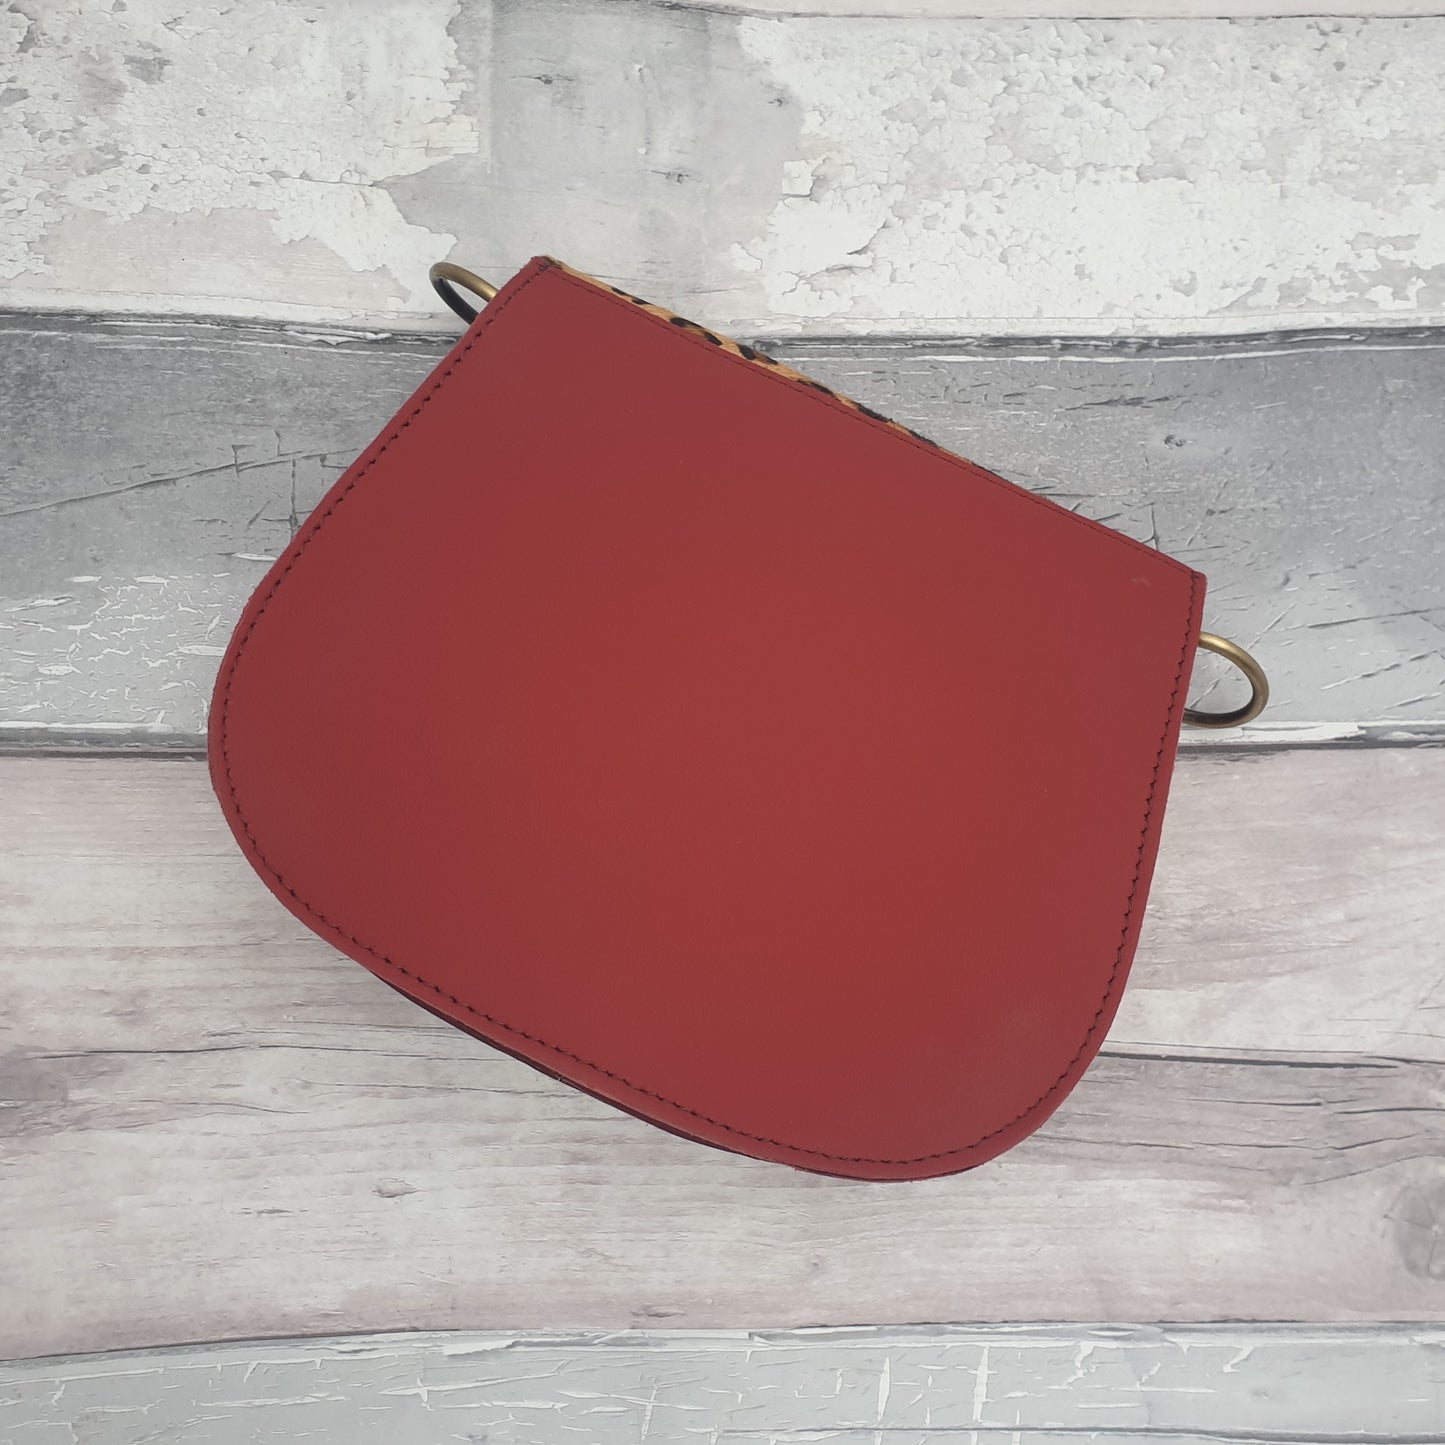 Red Leather Leopard Print Bag - Chloe - On Sale